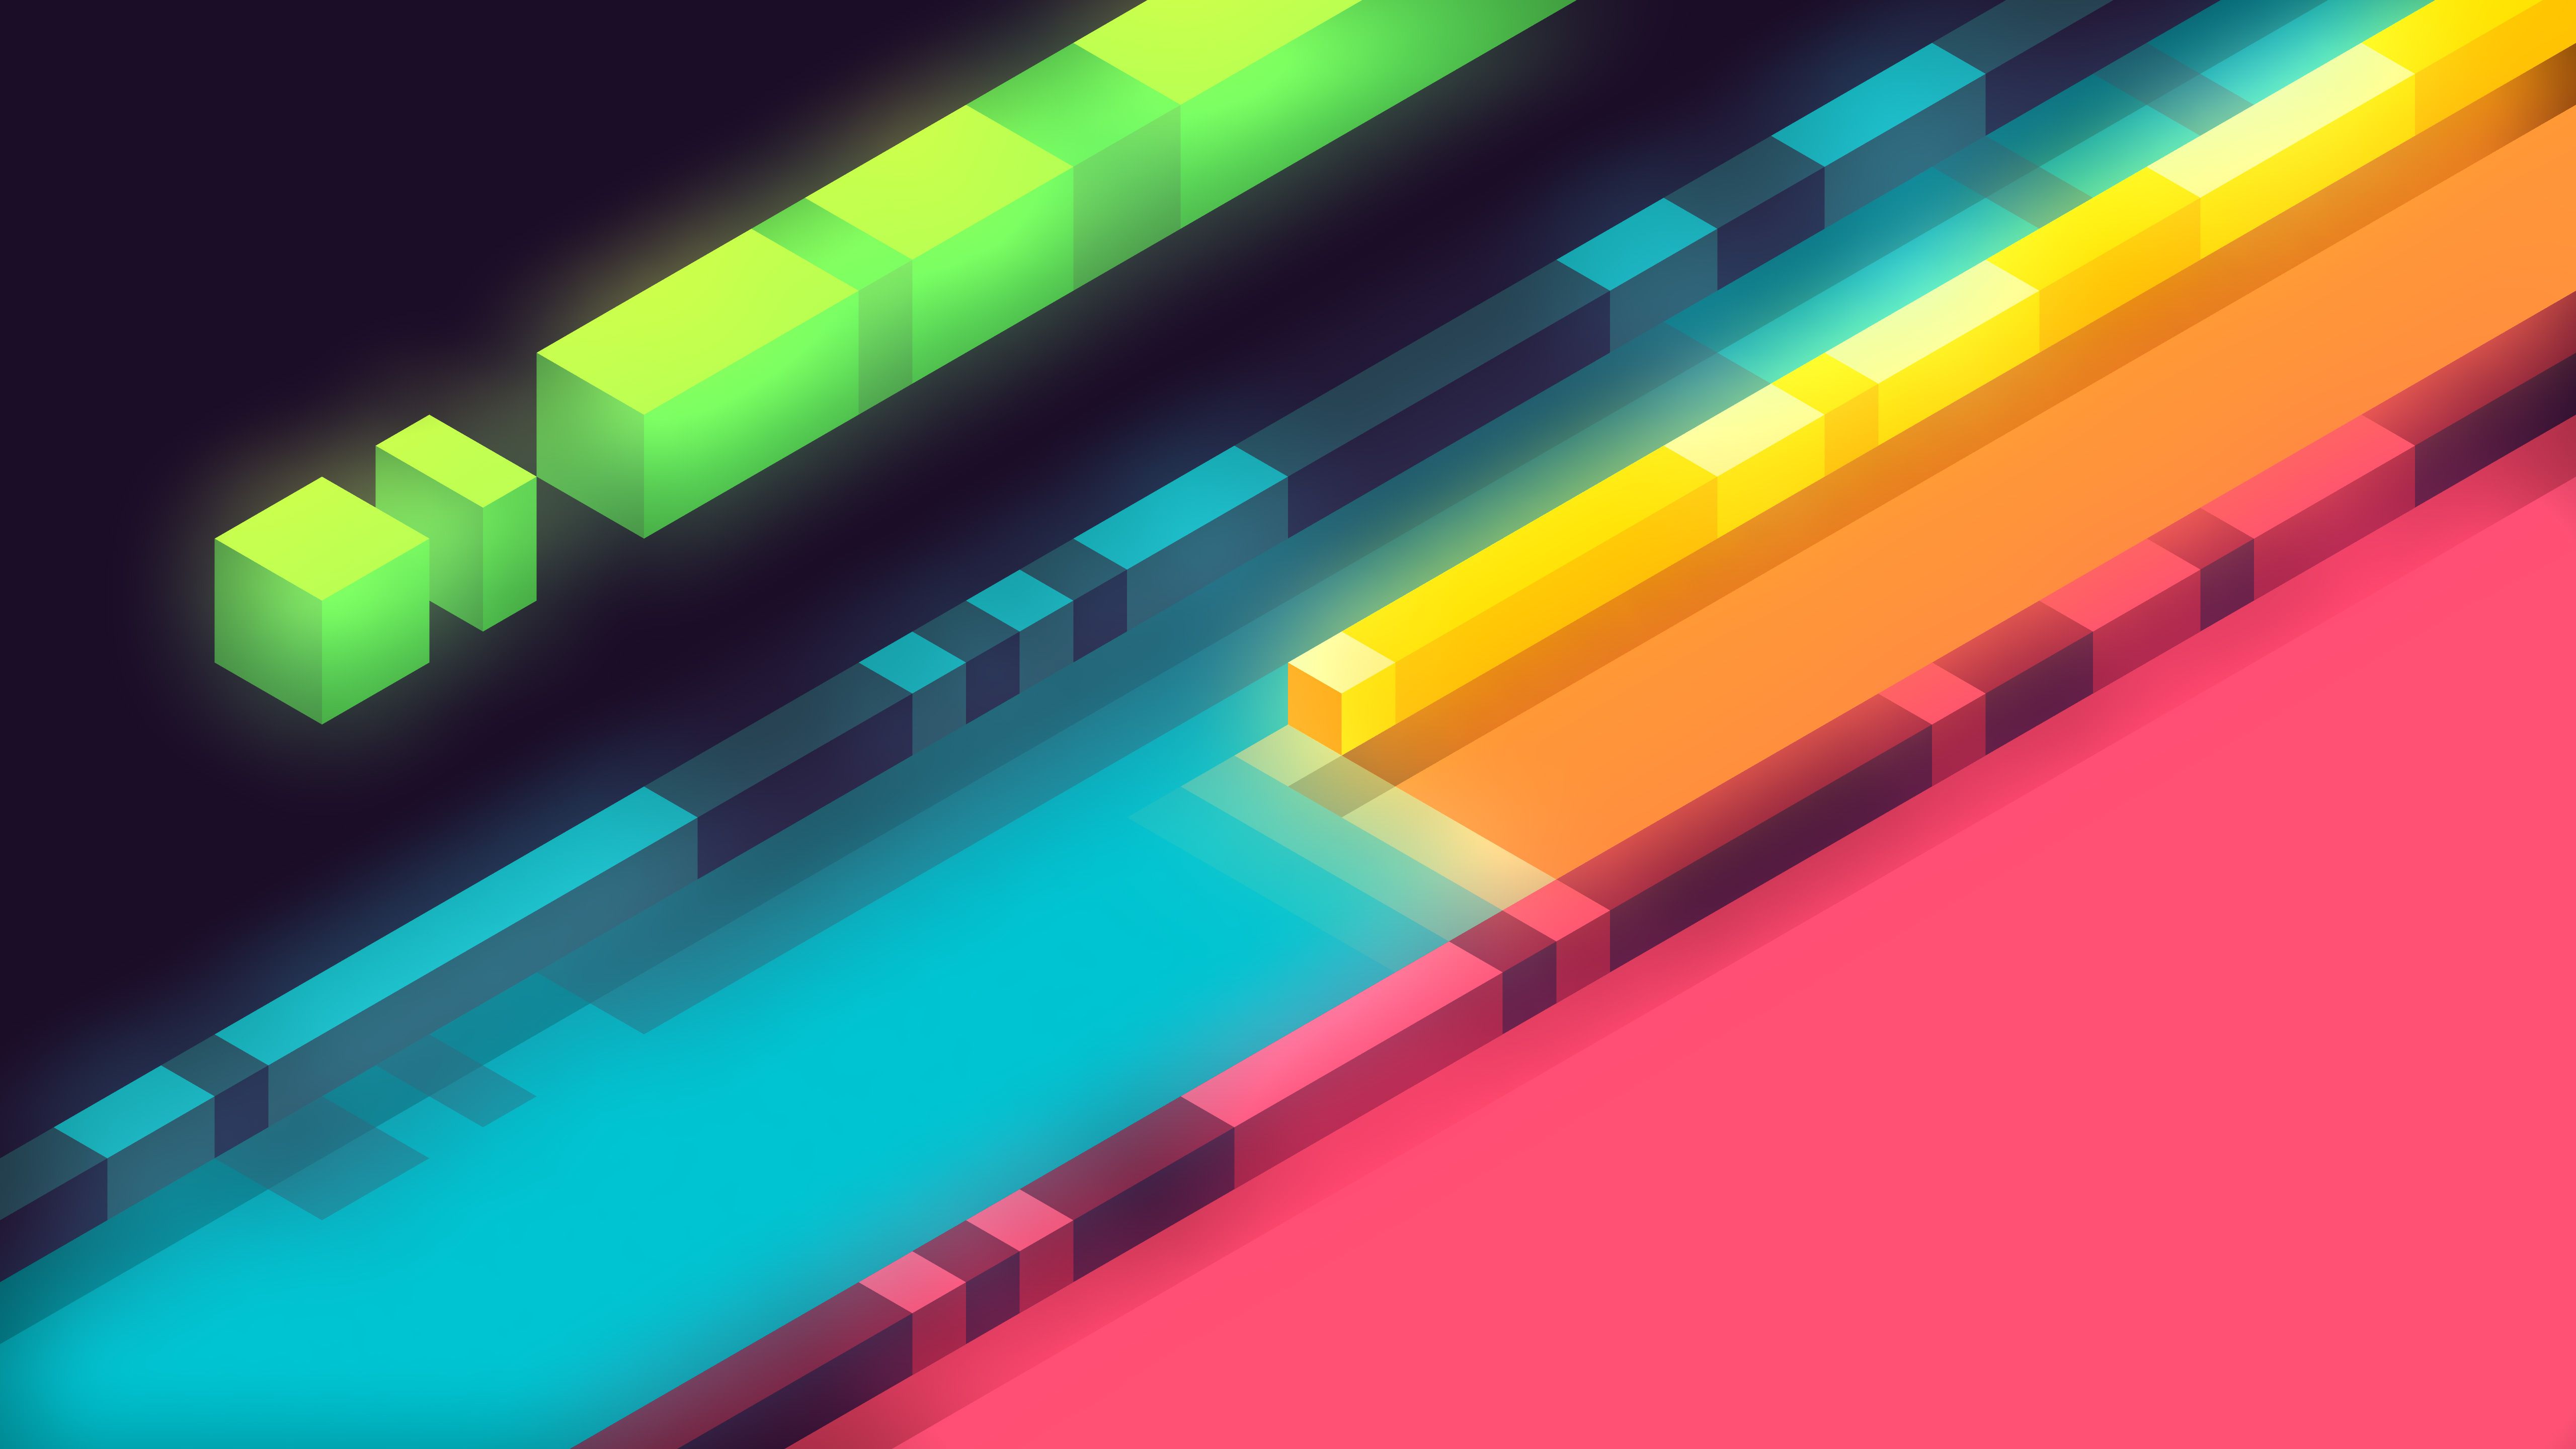 3D Abstract Colorful Shapes Minimalist 5k 1440P